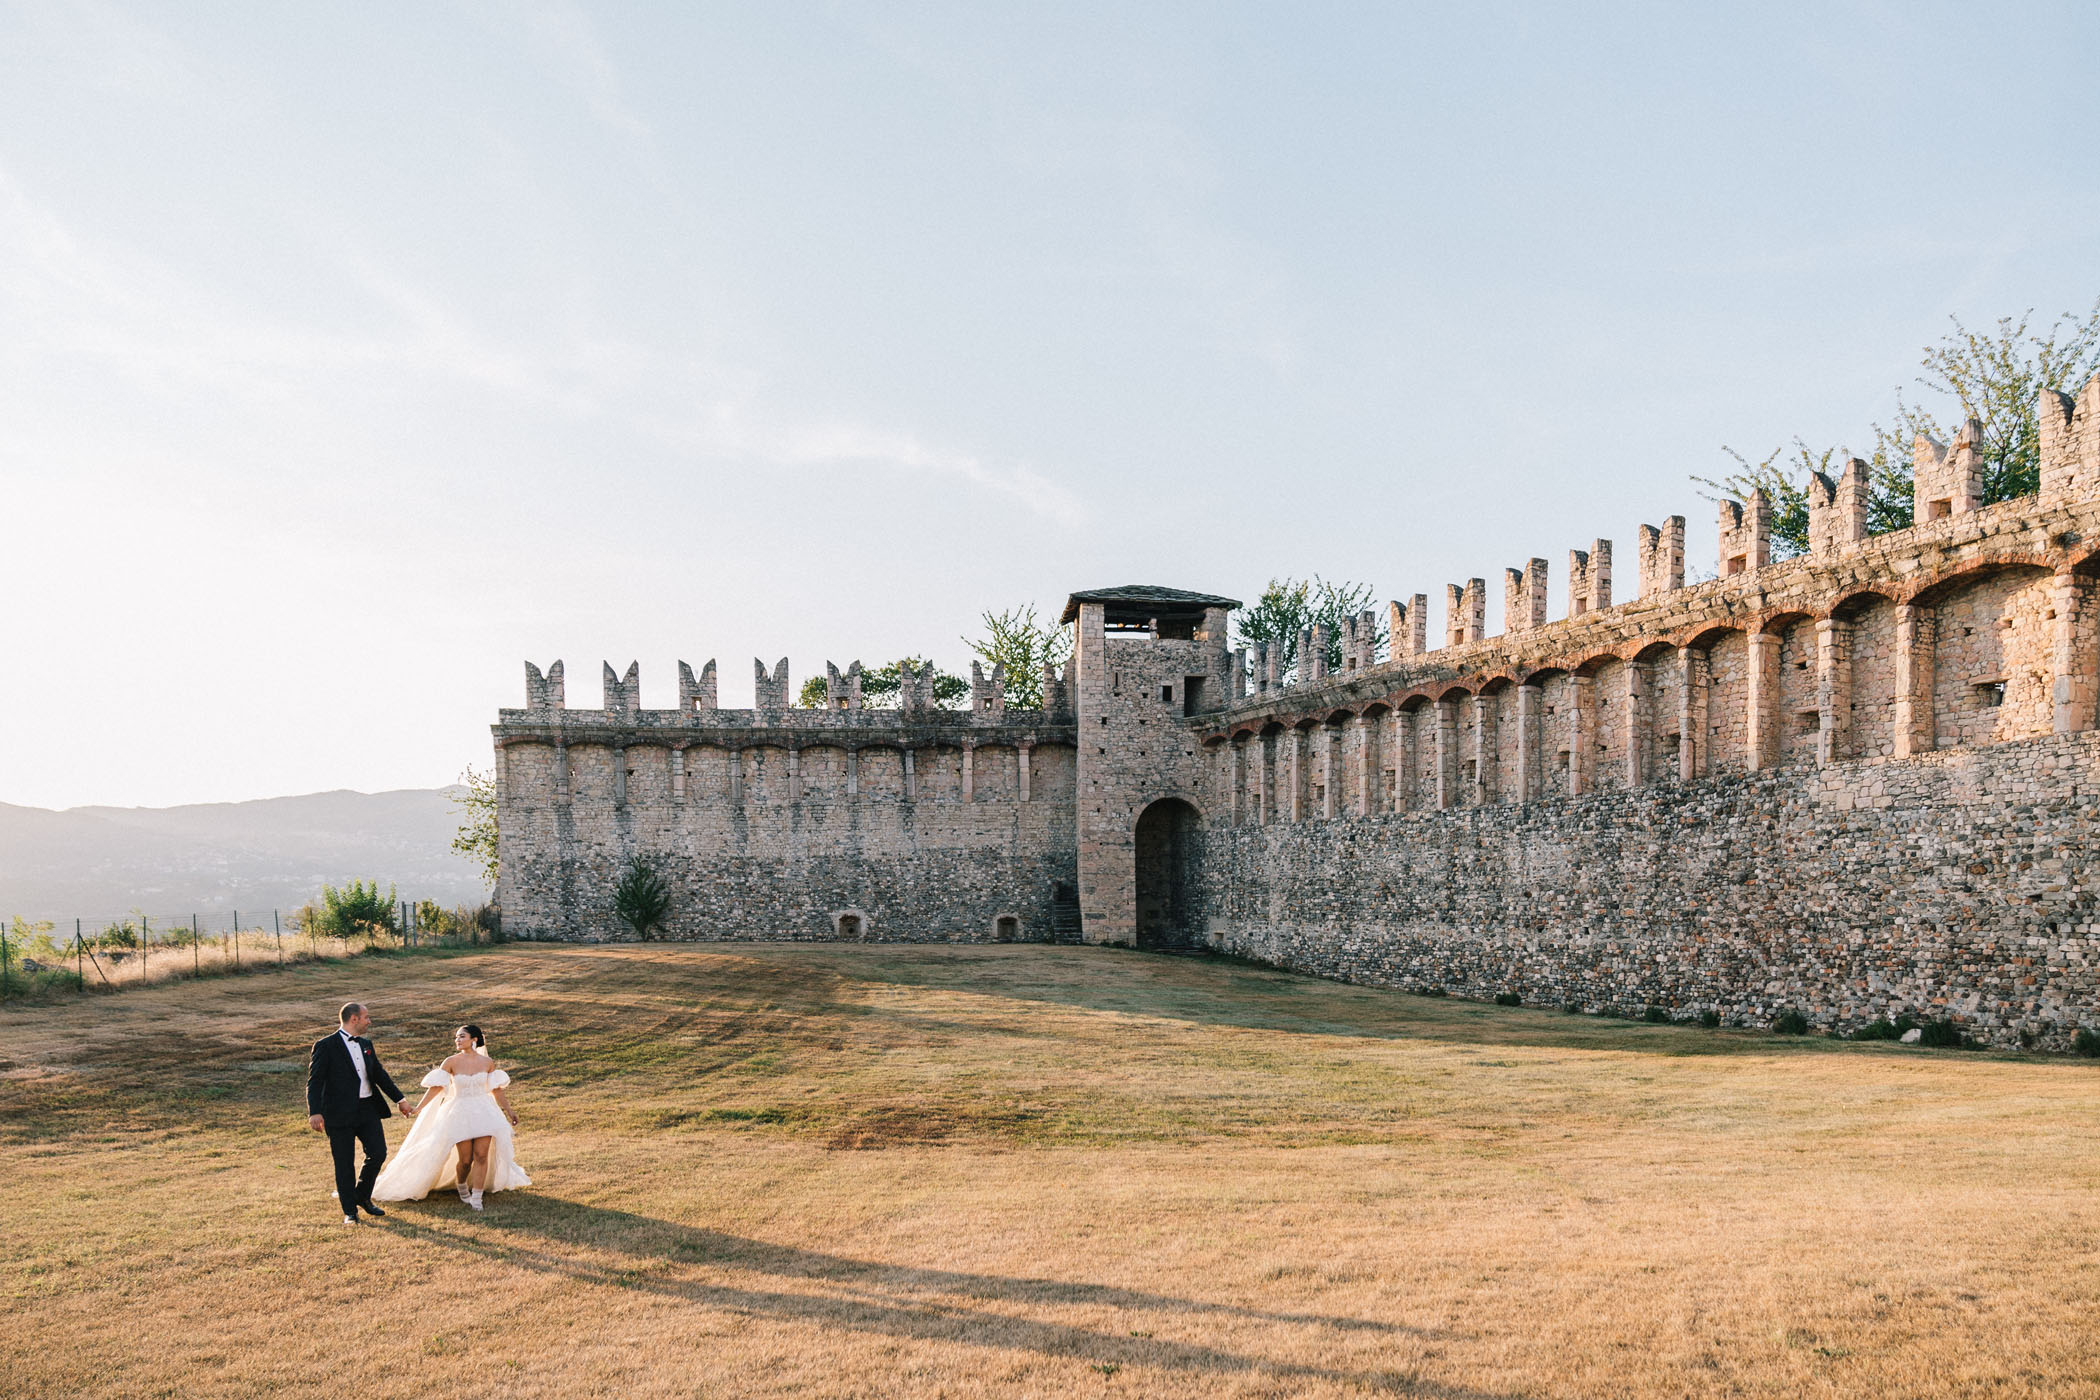 Eclectic Medieval Wedding in Italy